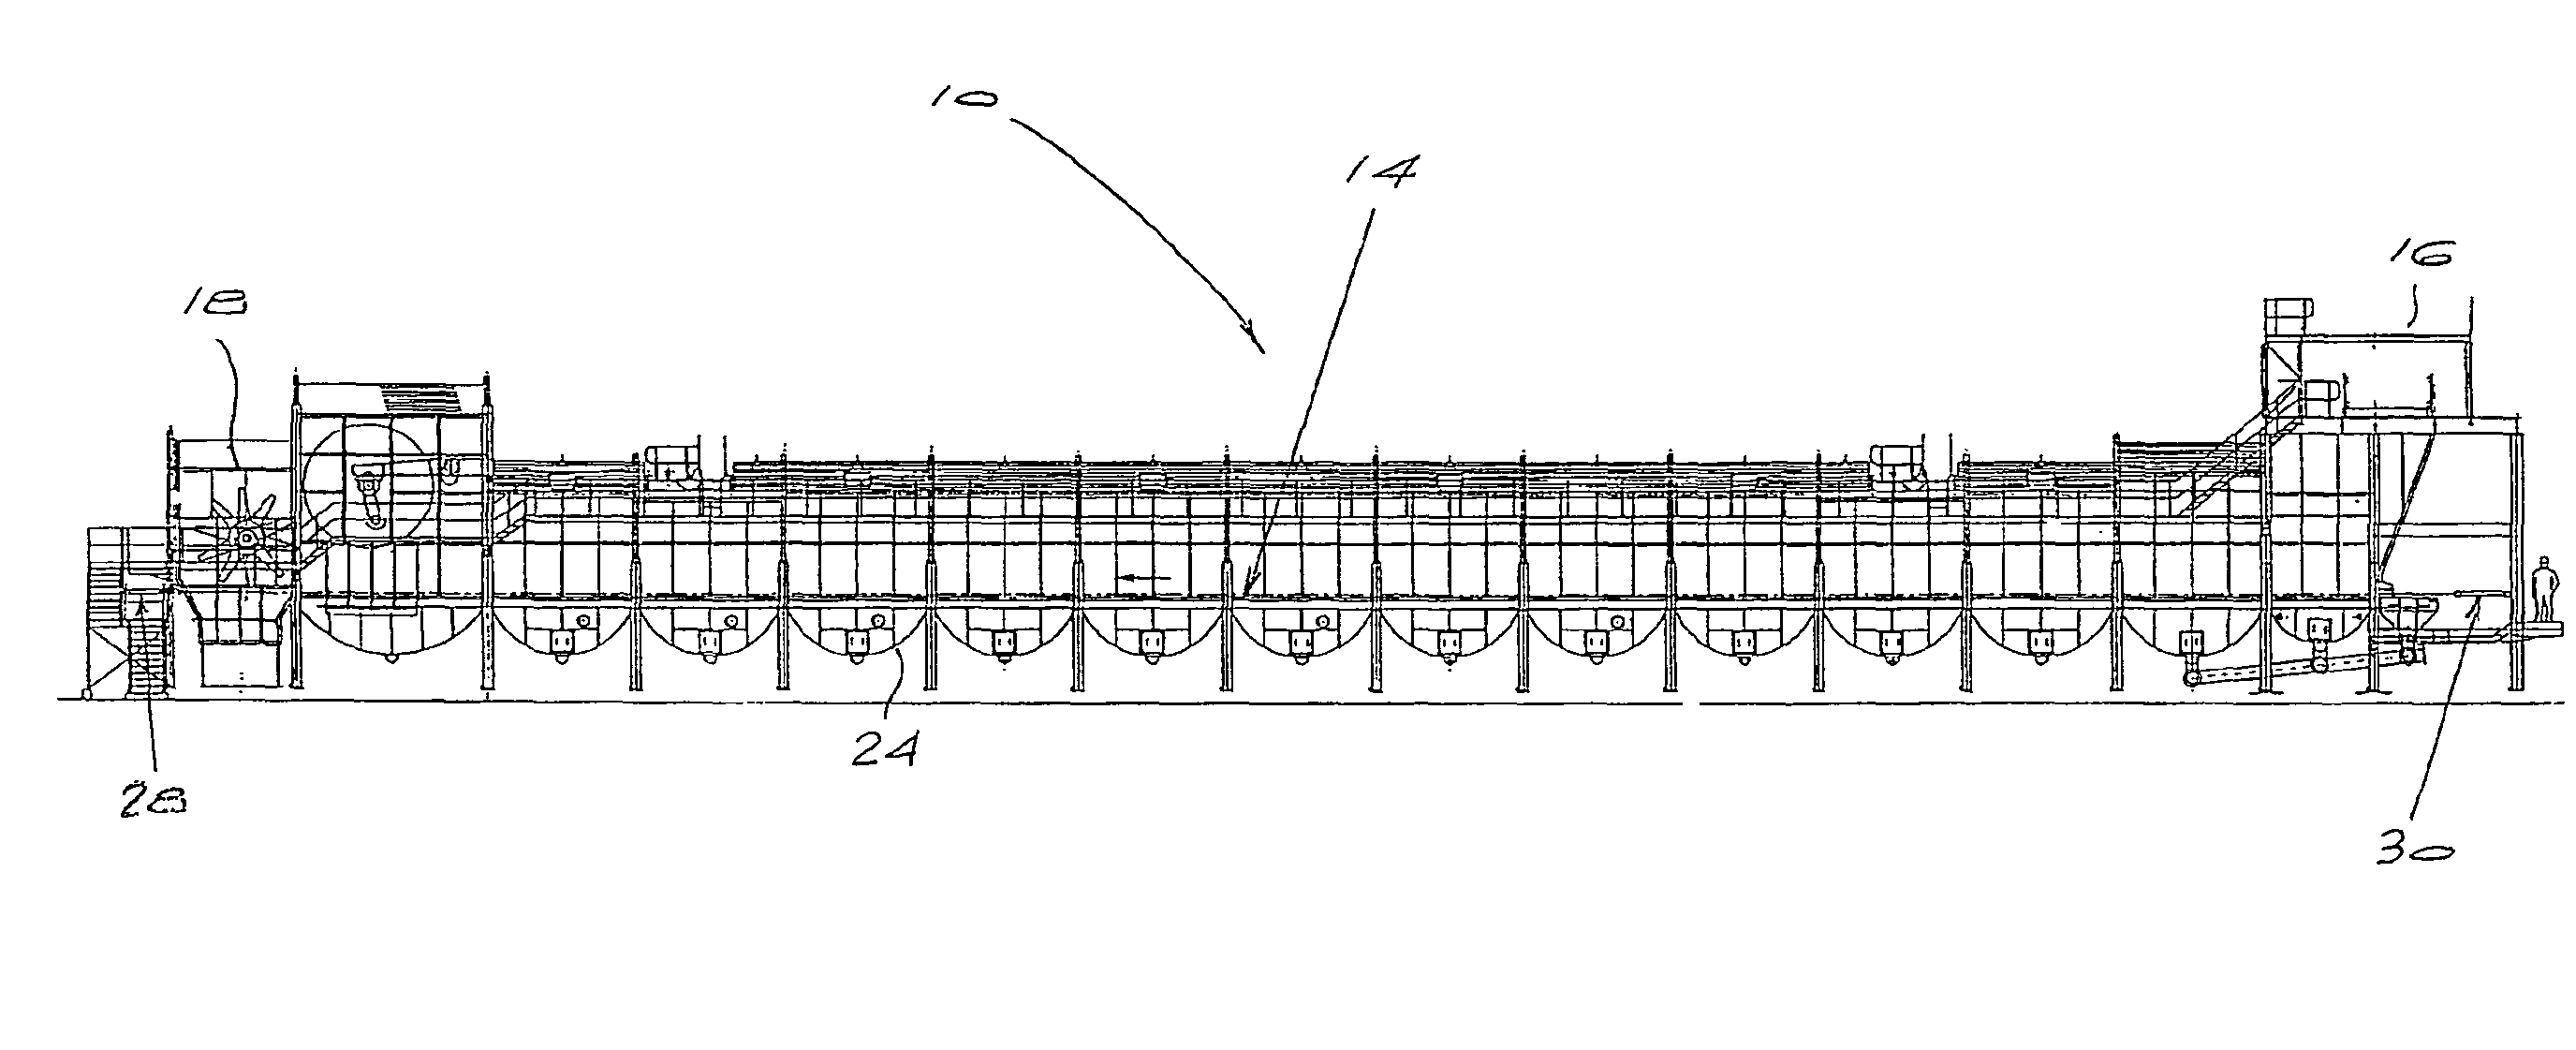 Method and apparatus for transporting a product within a diffuser